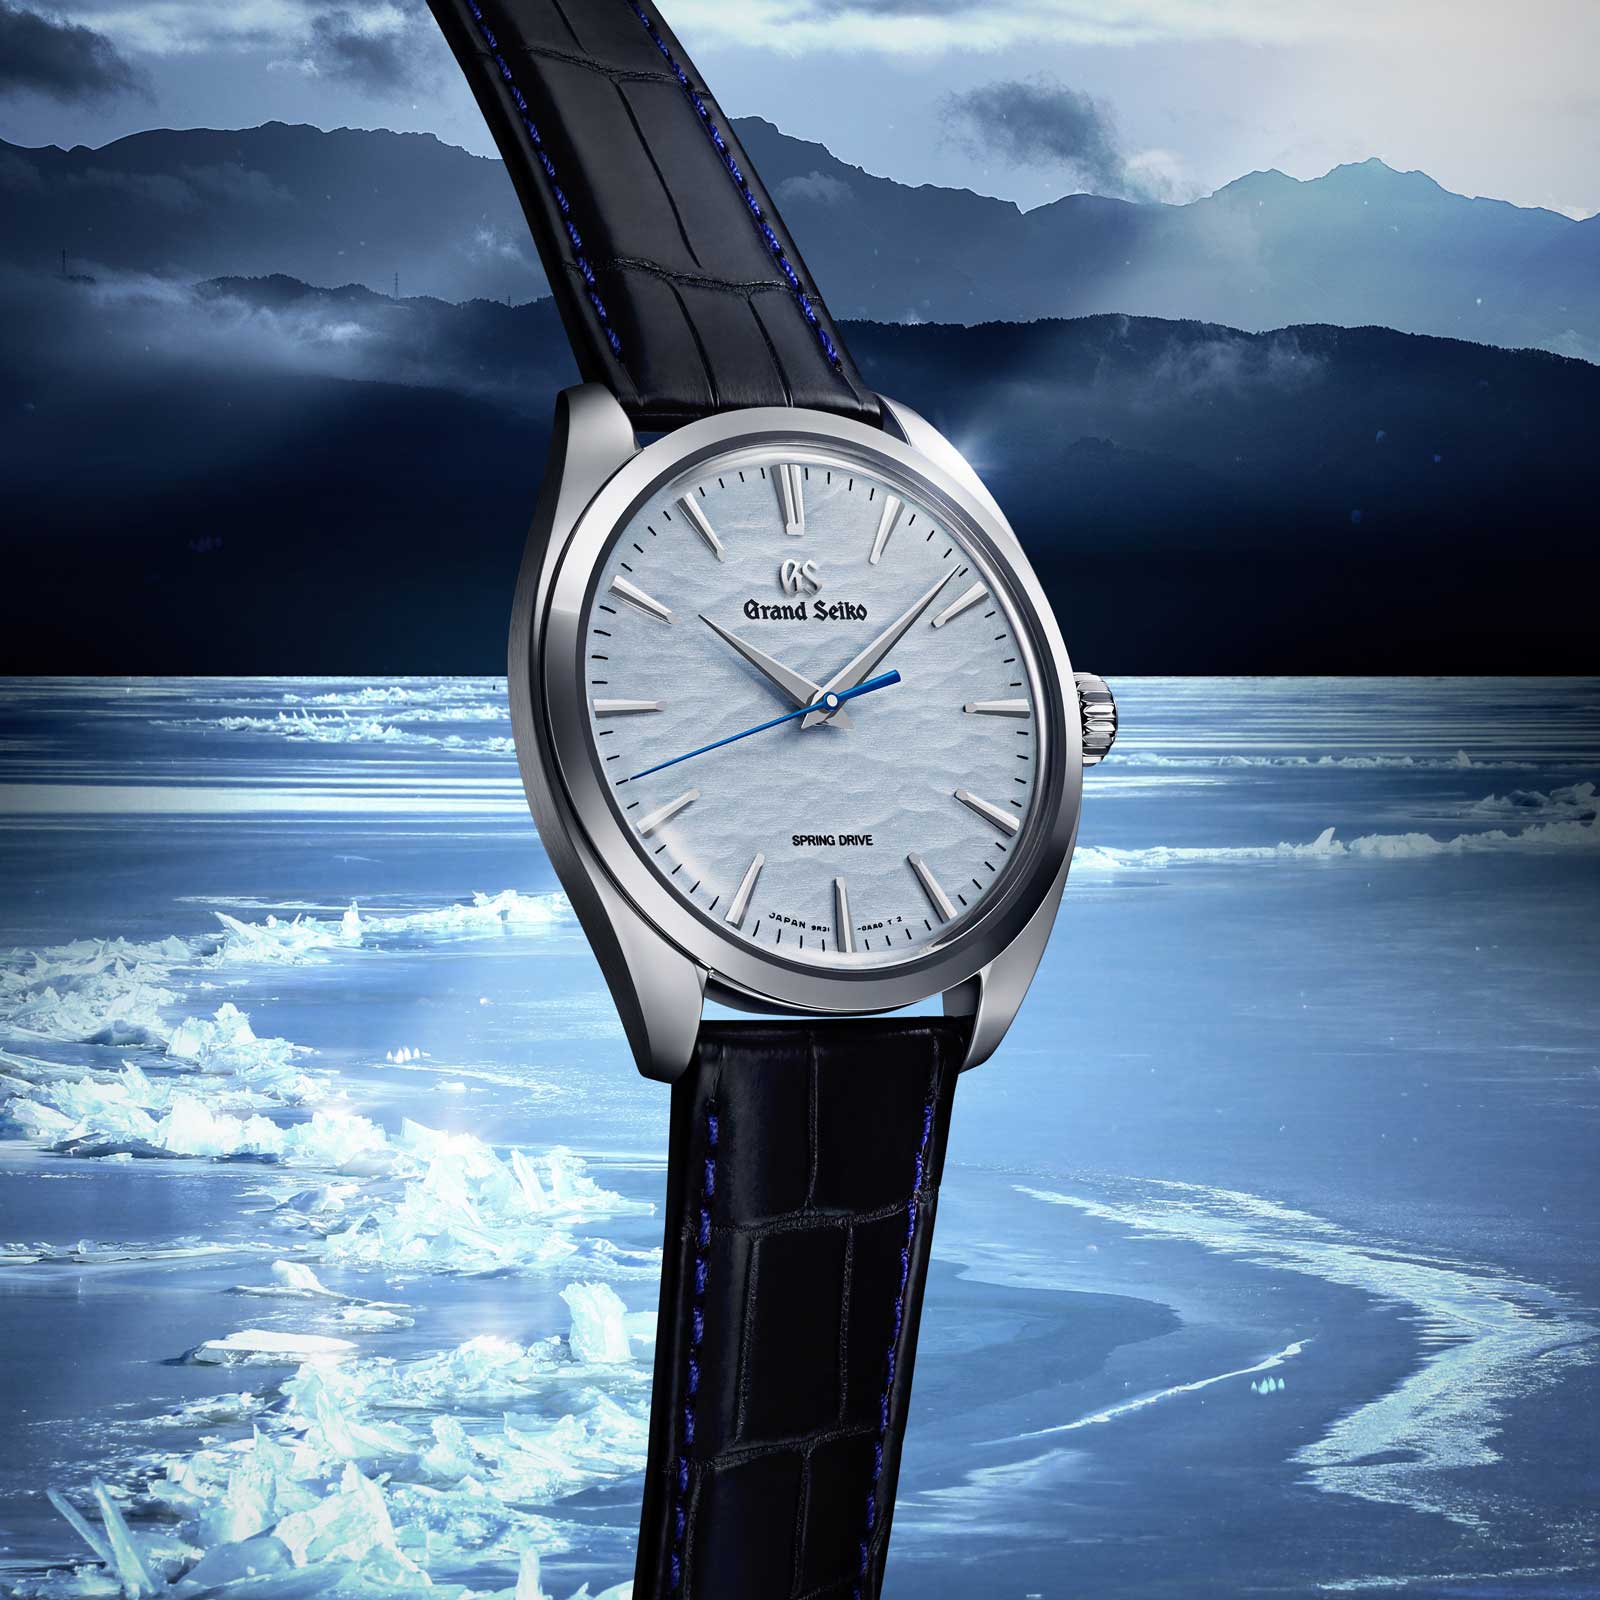 Grand Seiko SBGY007 - blue dial wristwatch in a stainless steel case against frozen lake background. 